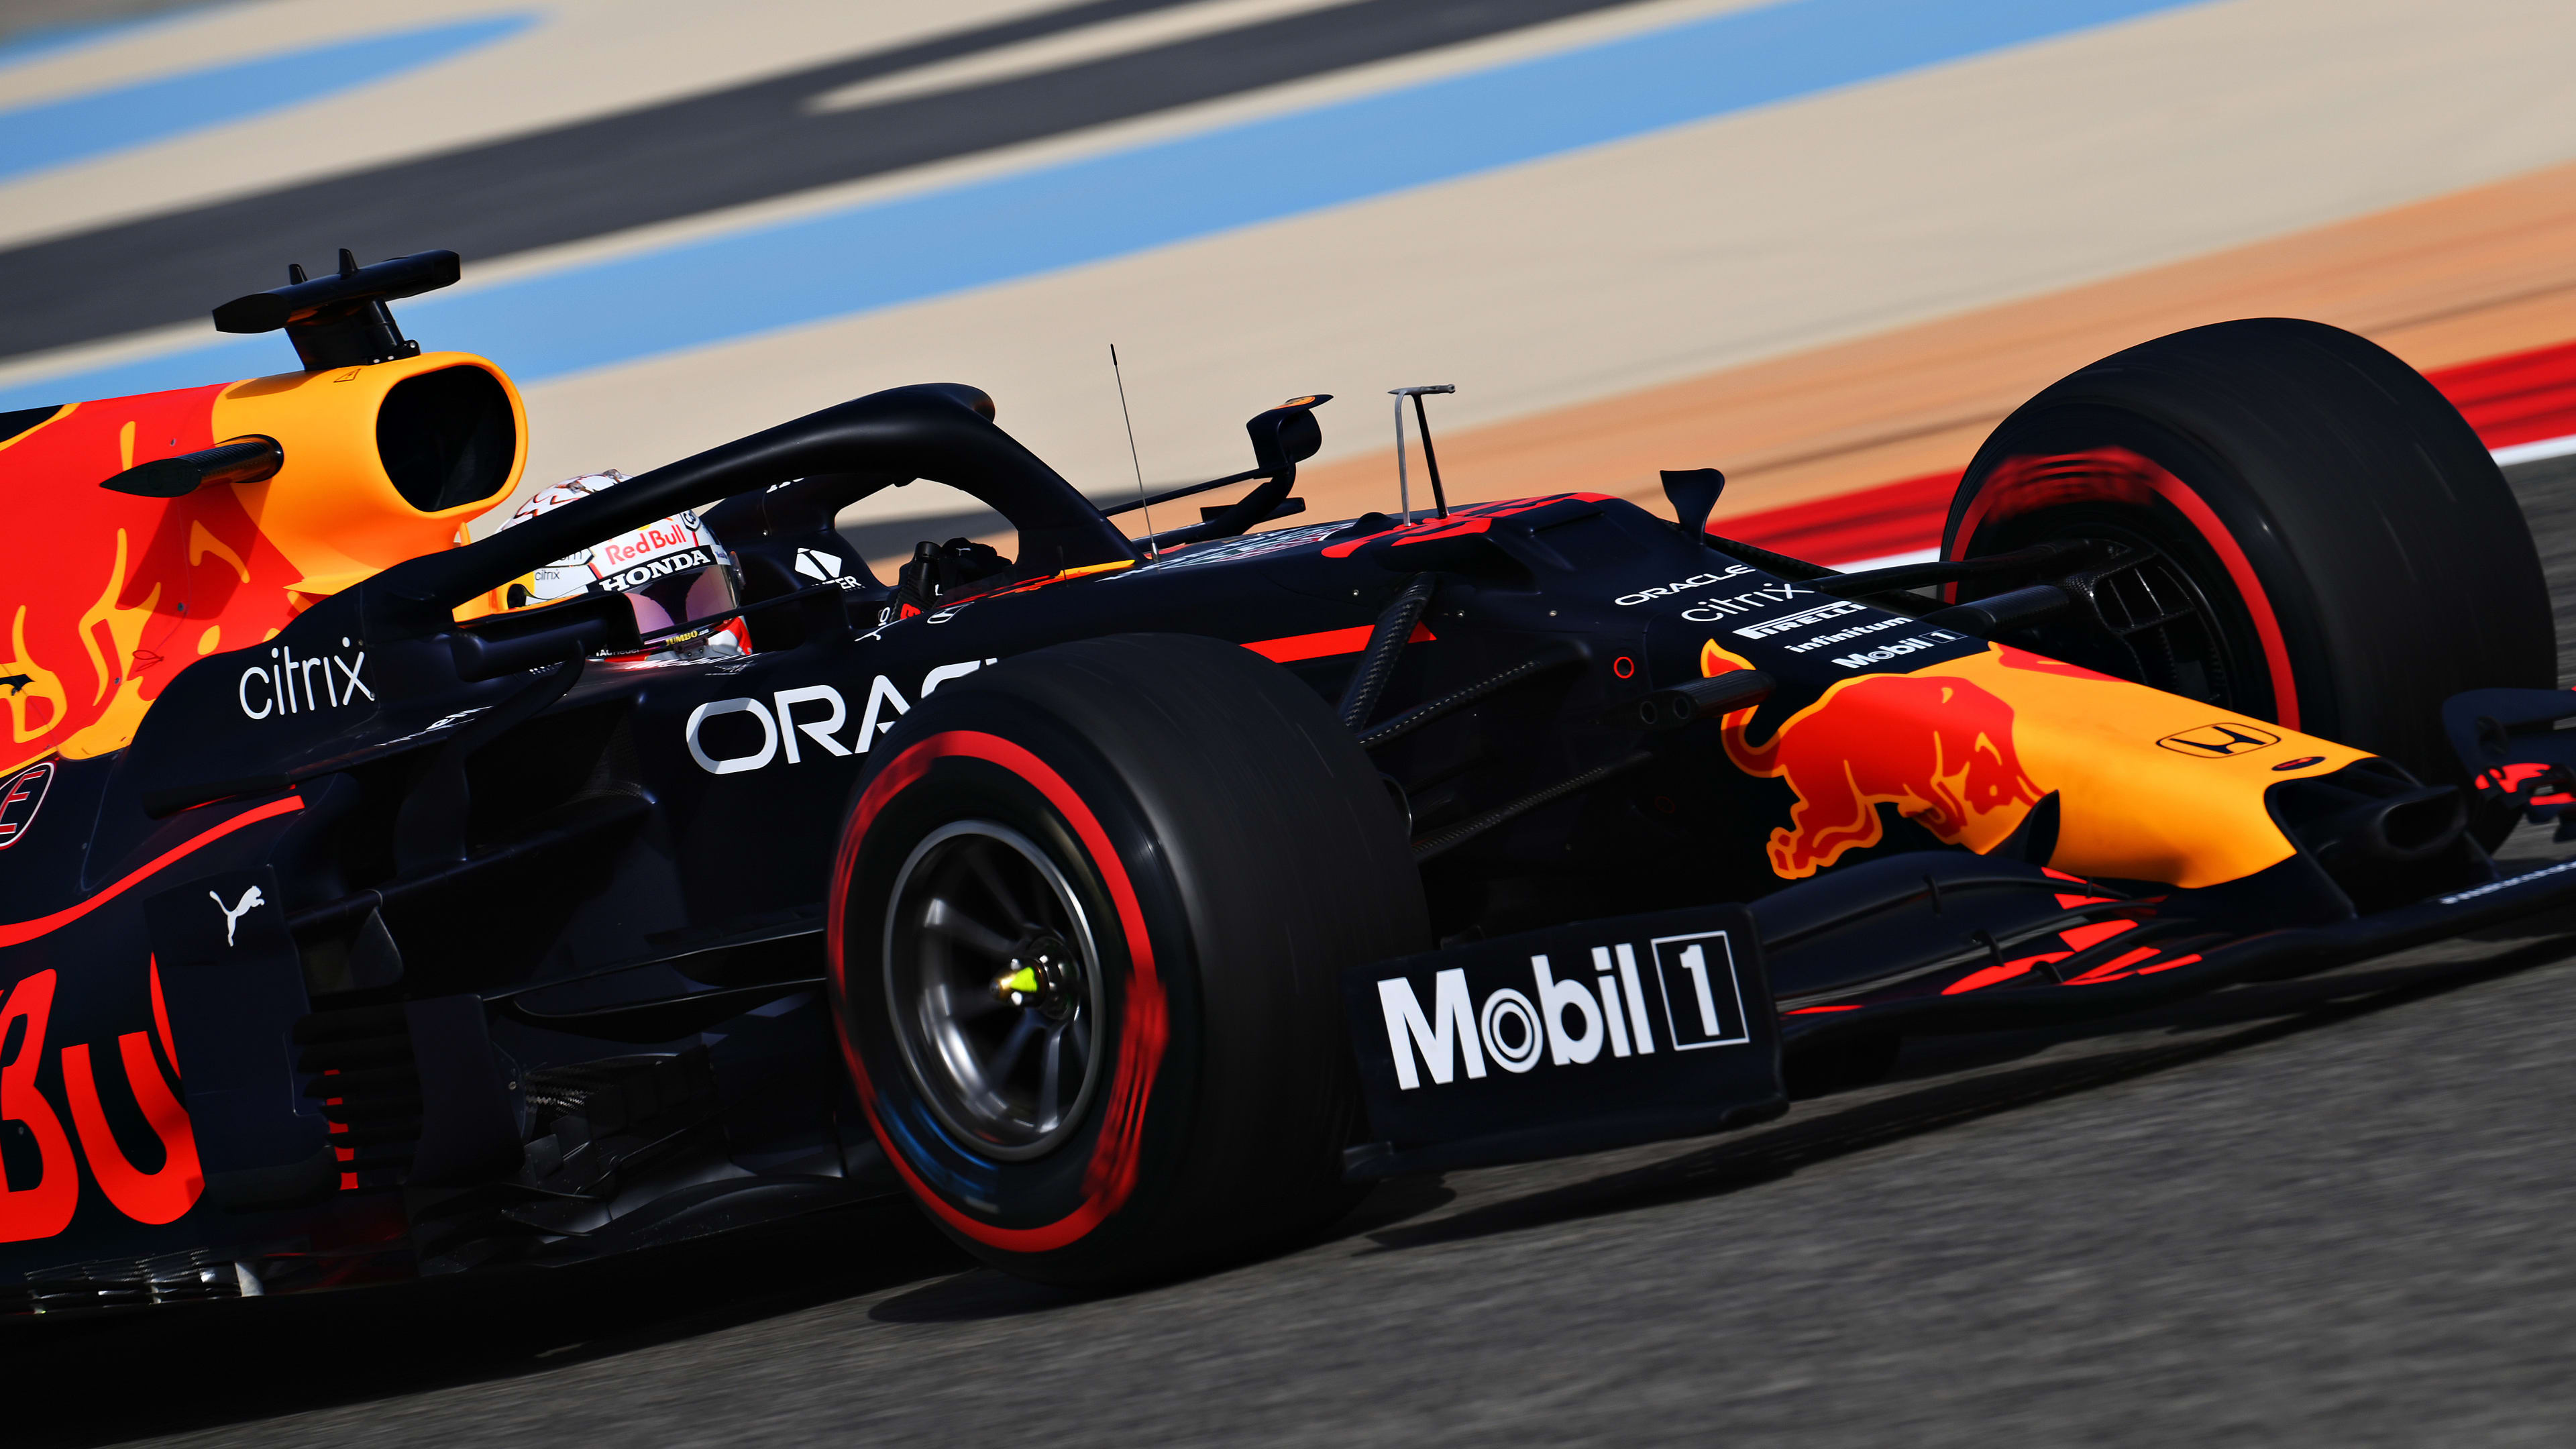 2021 Bahrain Grand Prix FP1 report and highlights Max Verstappen quickest in first practice in Bahrain as 2021 season gets up and running Formula 1®